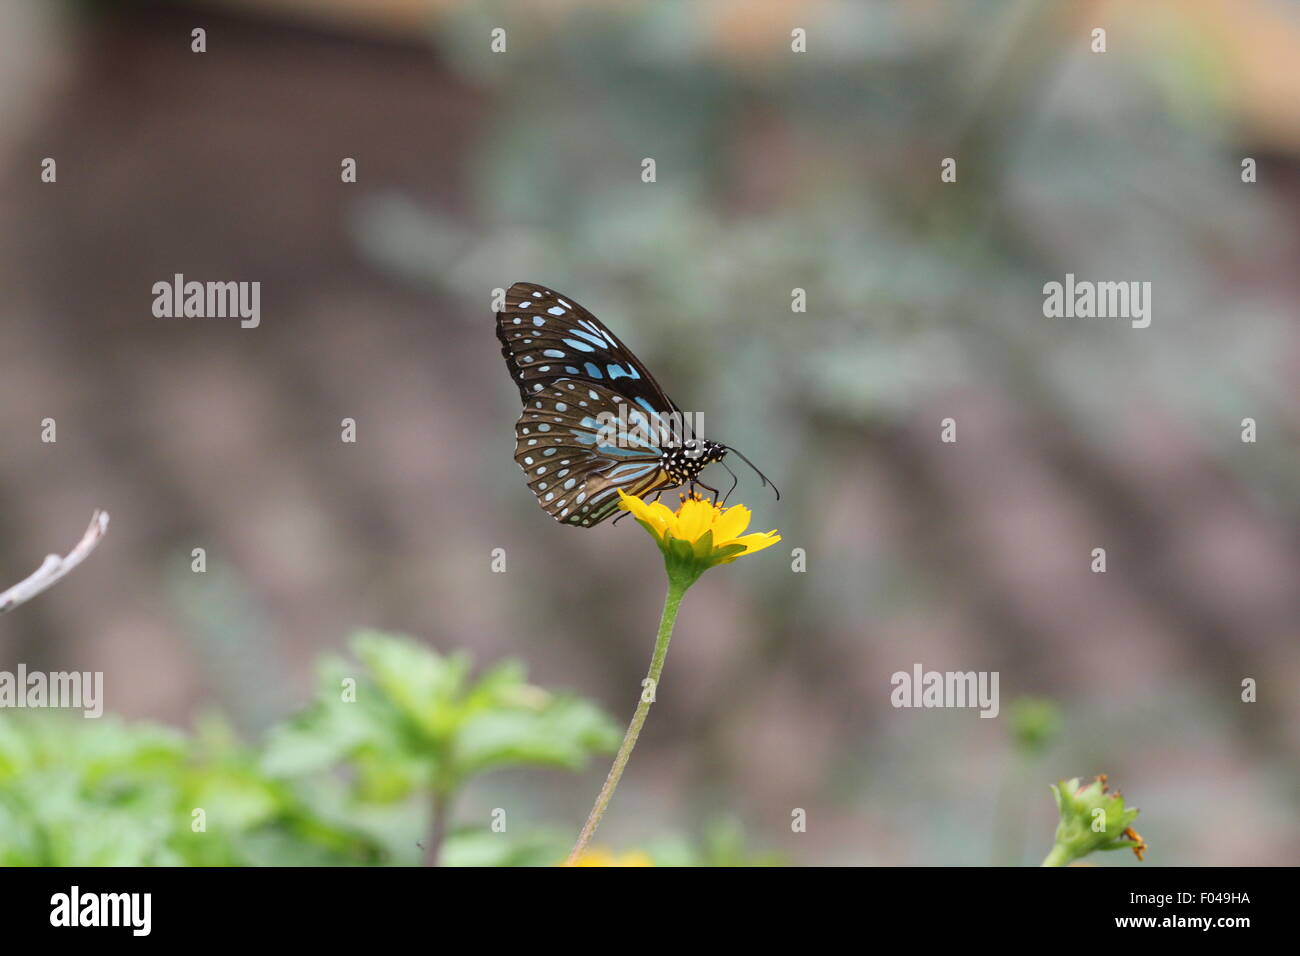 Blue tiger butterfly Stock Photo